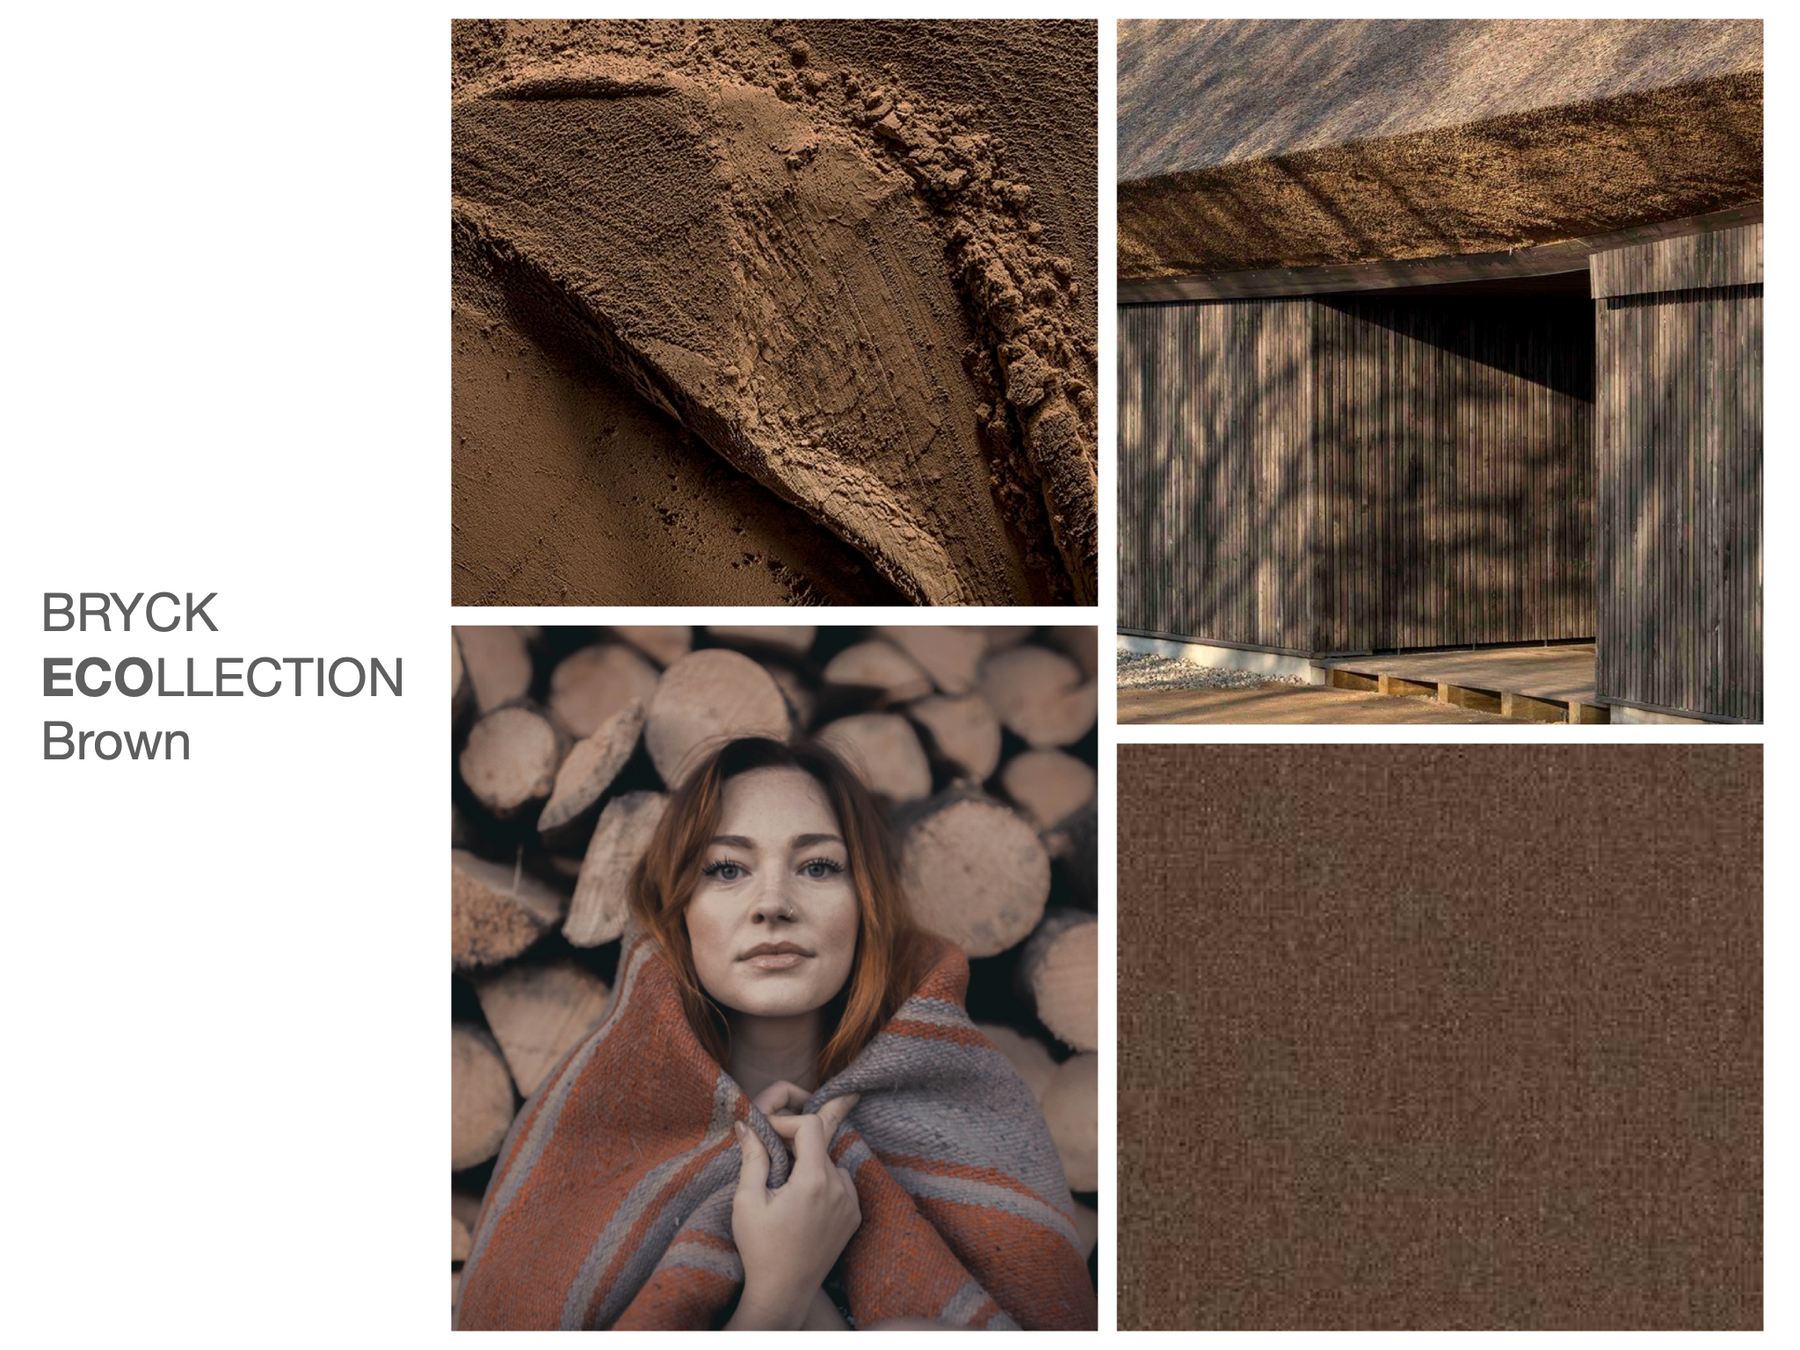 BRYCK Liegestuhl Together Ecollection Brown